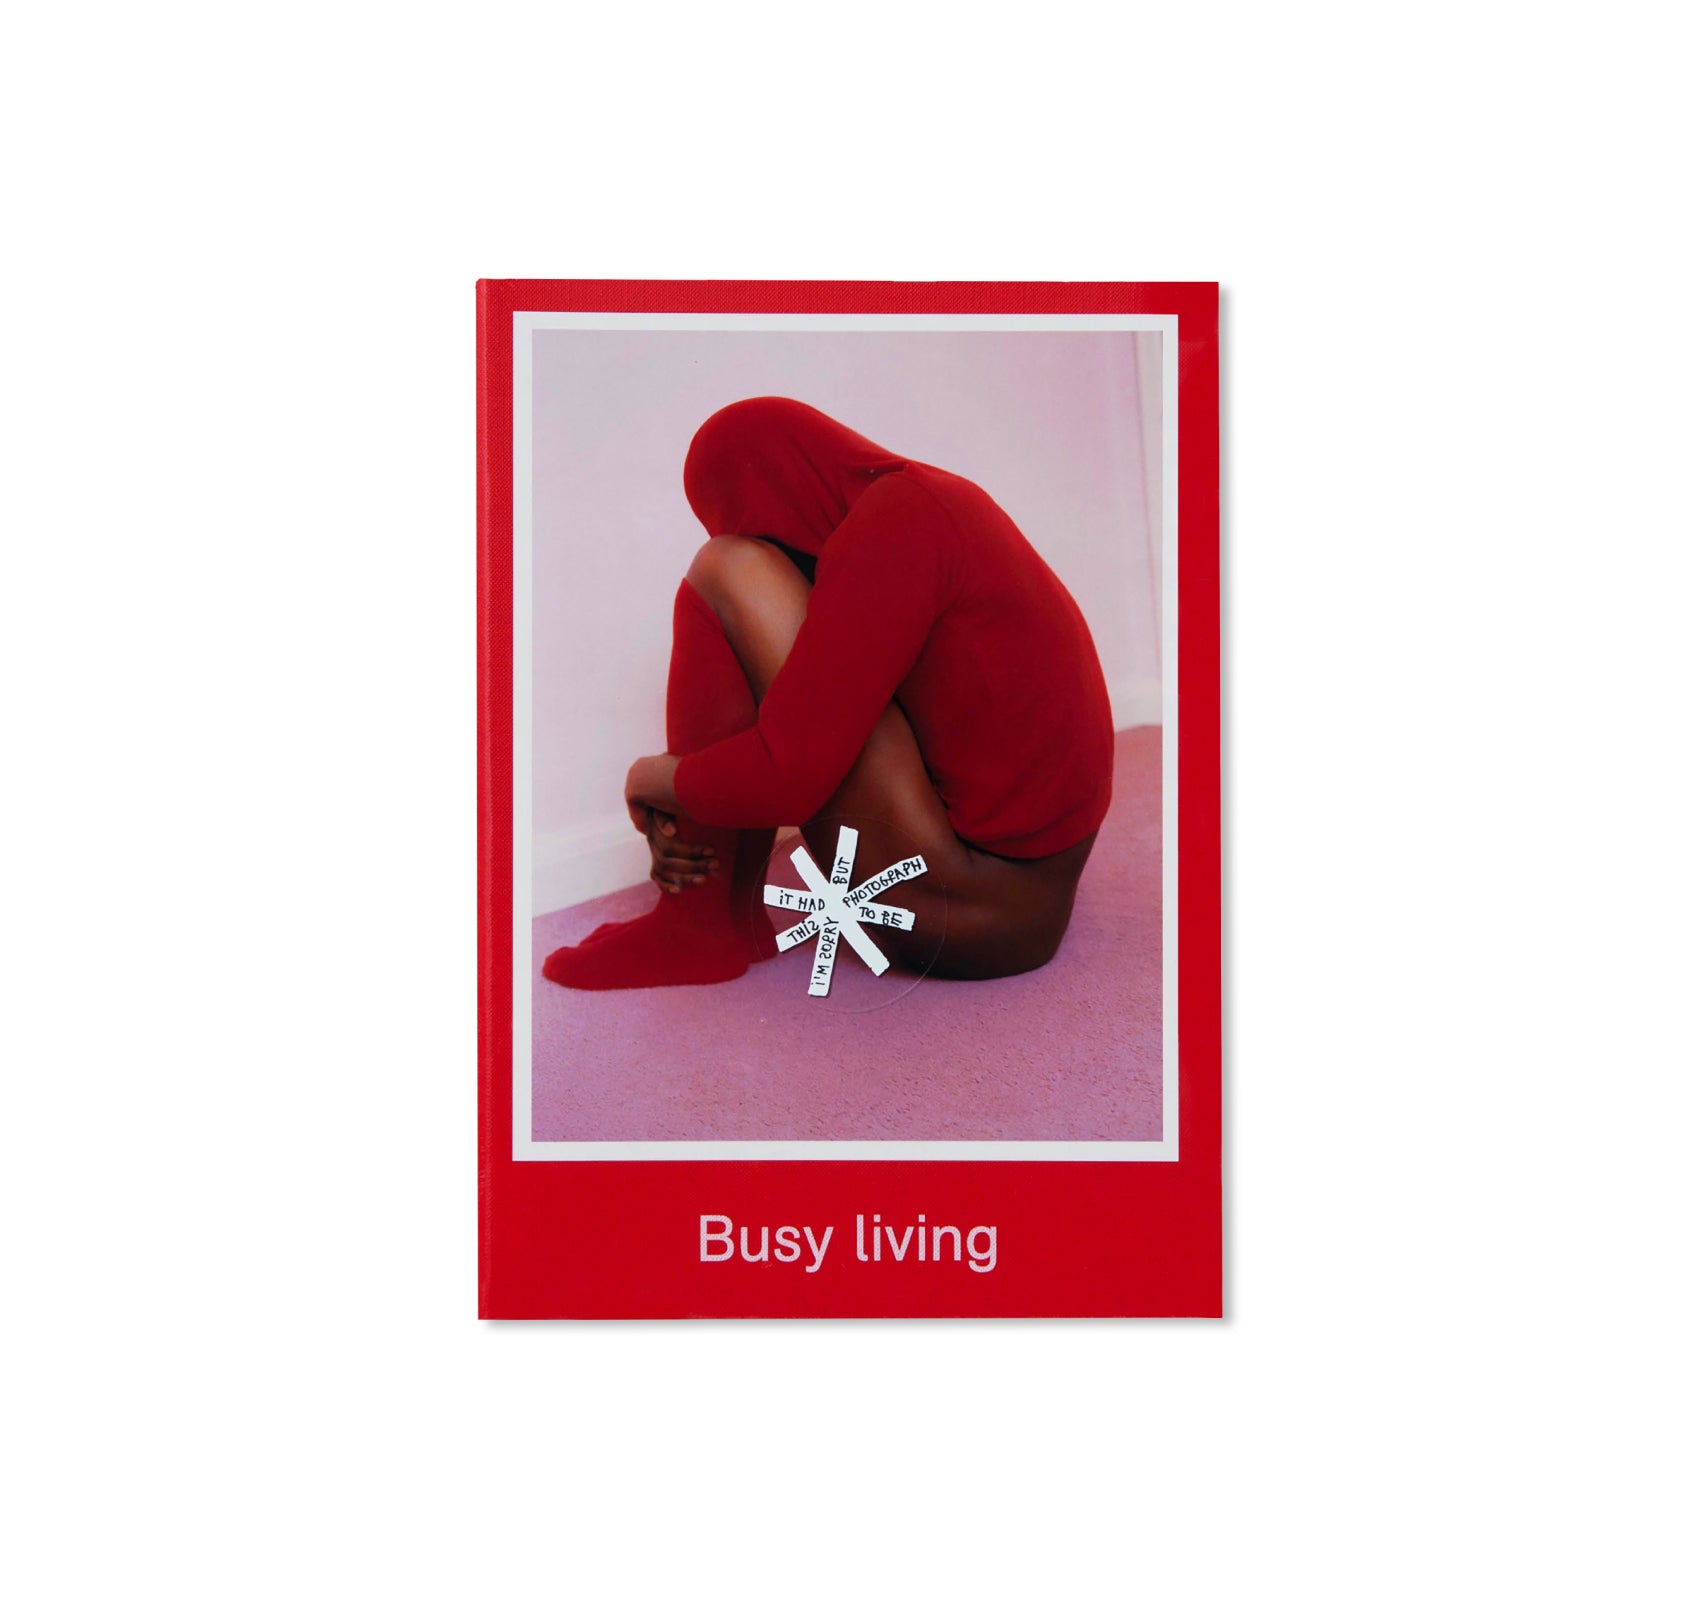 BUSY LIVING by Coco Capitán – twelvebooks